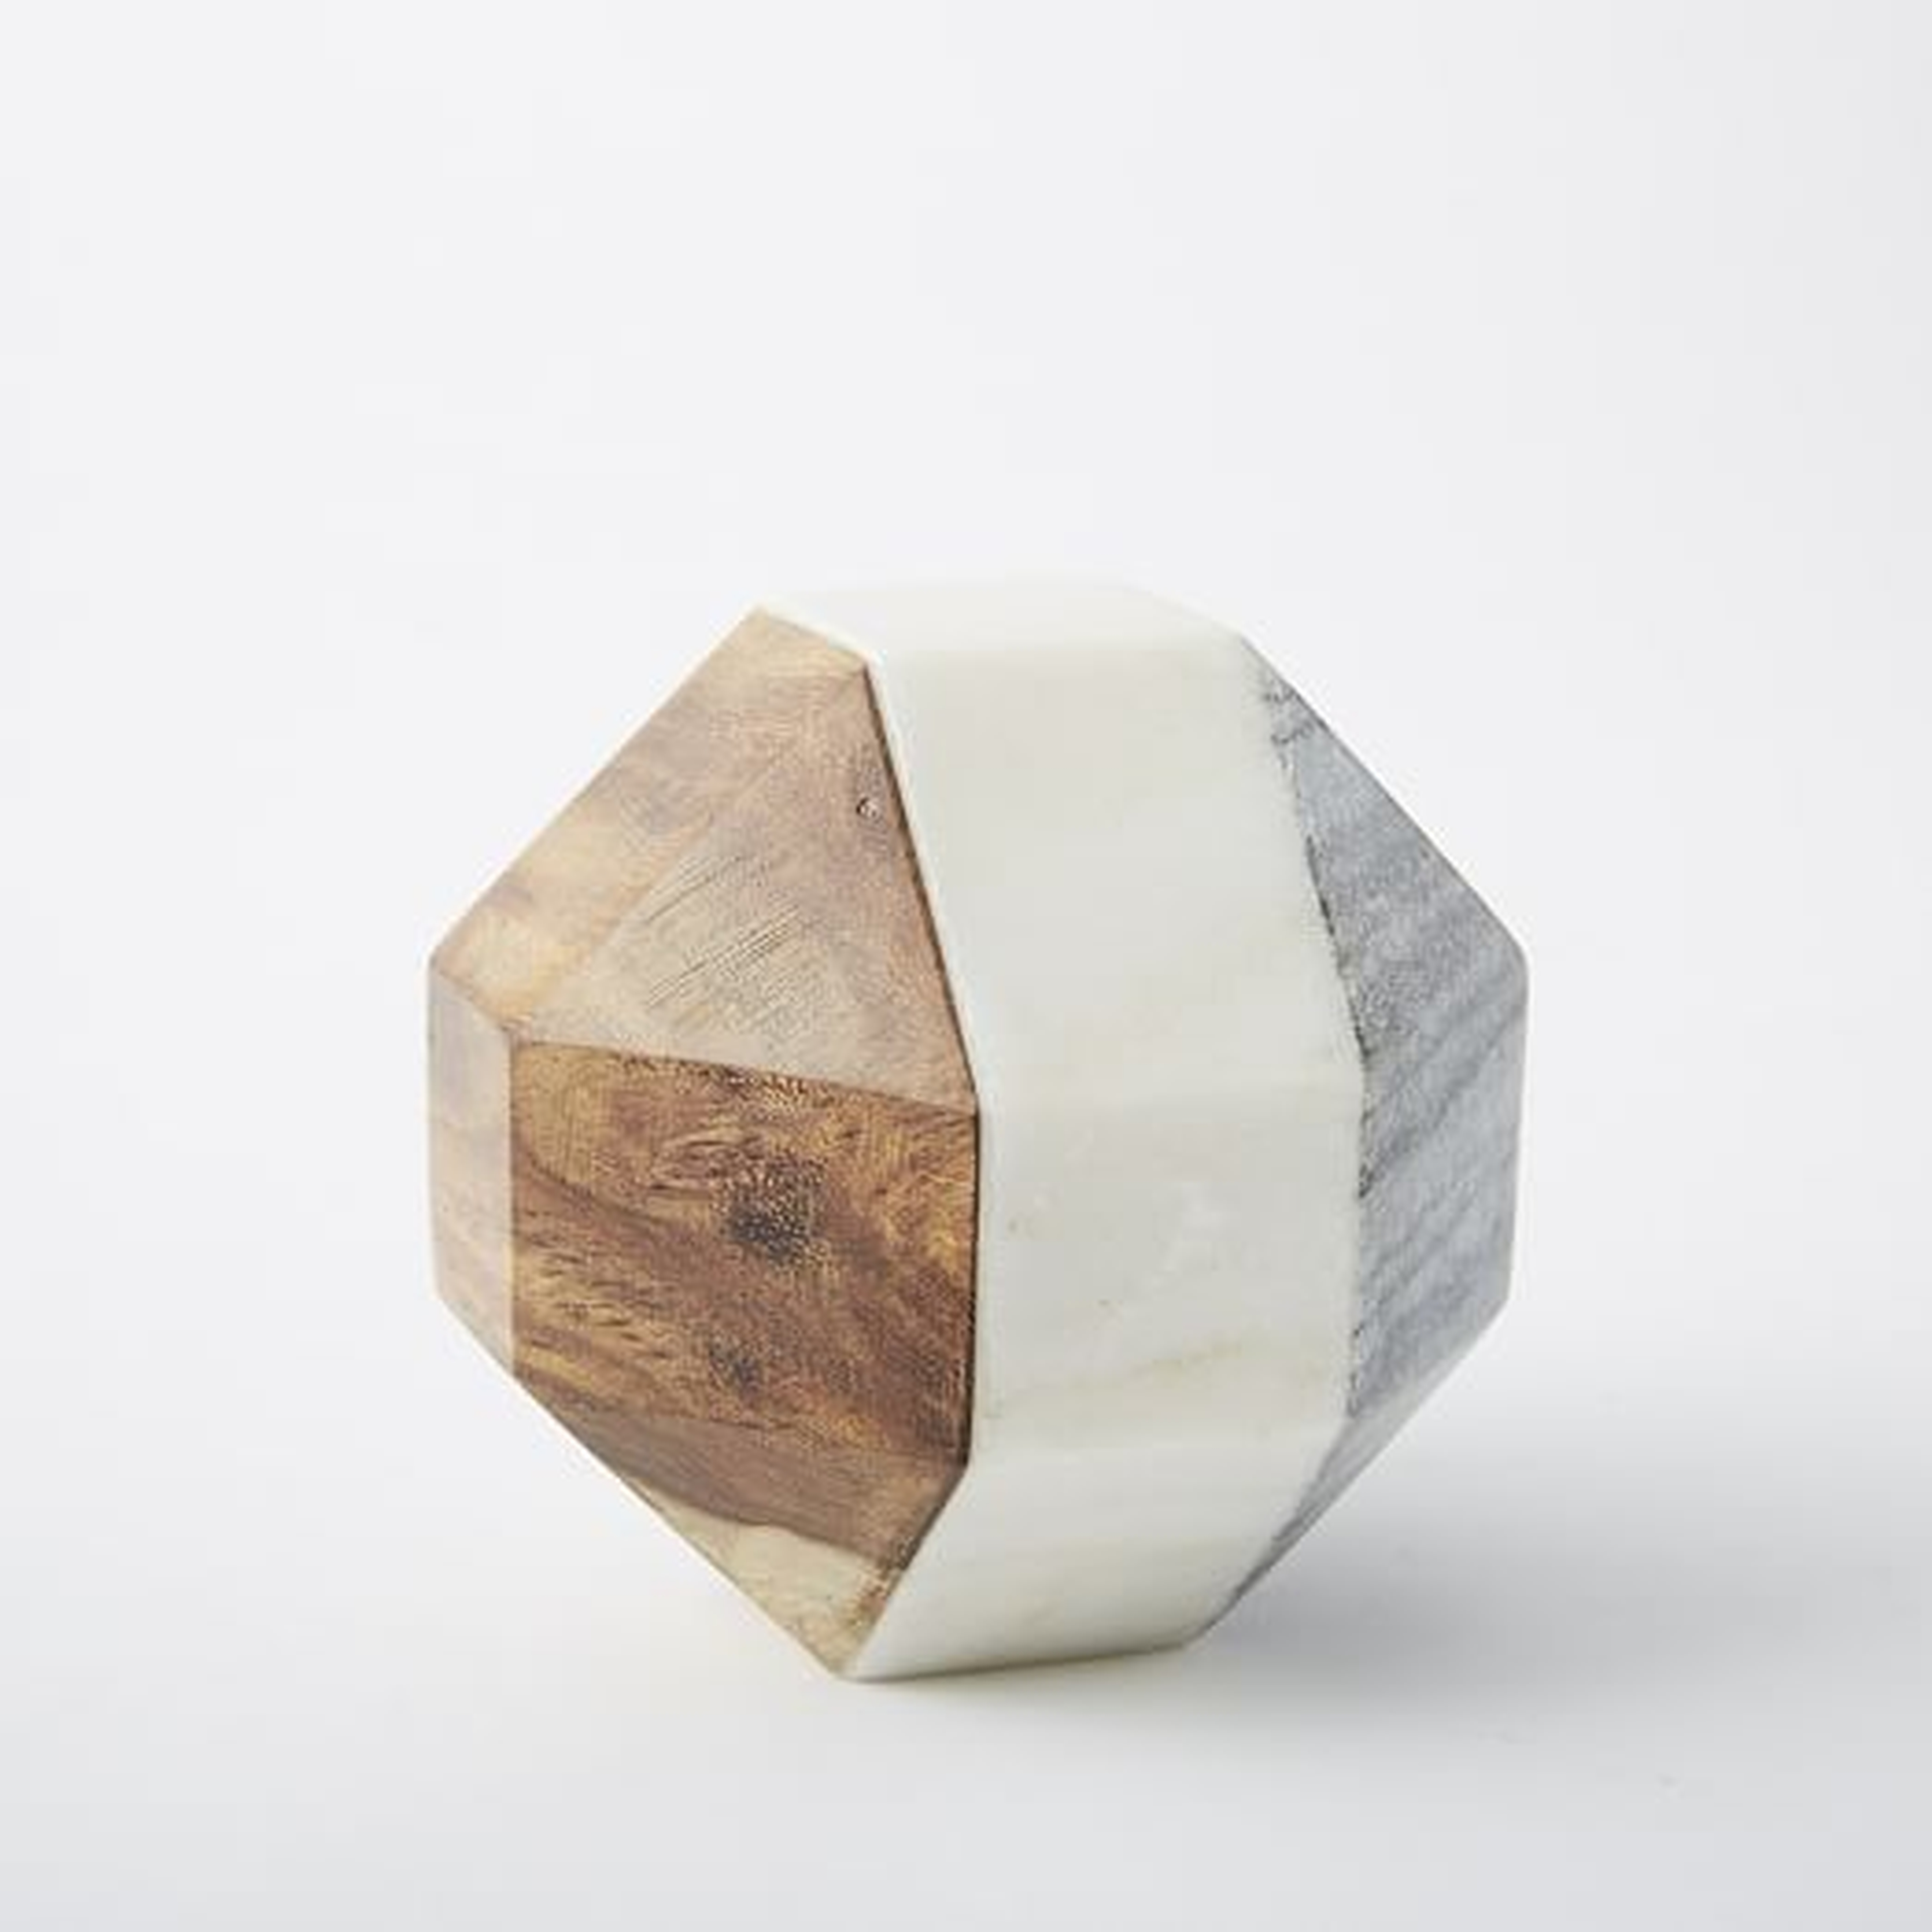 Marble + Wood Geometric Objects - Polyhedron - West Elm